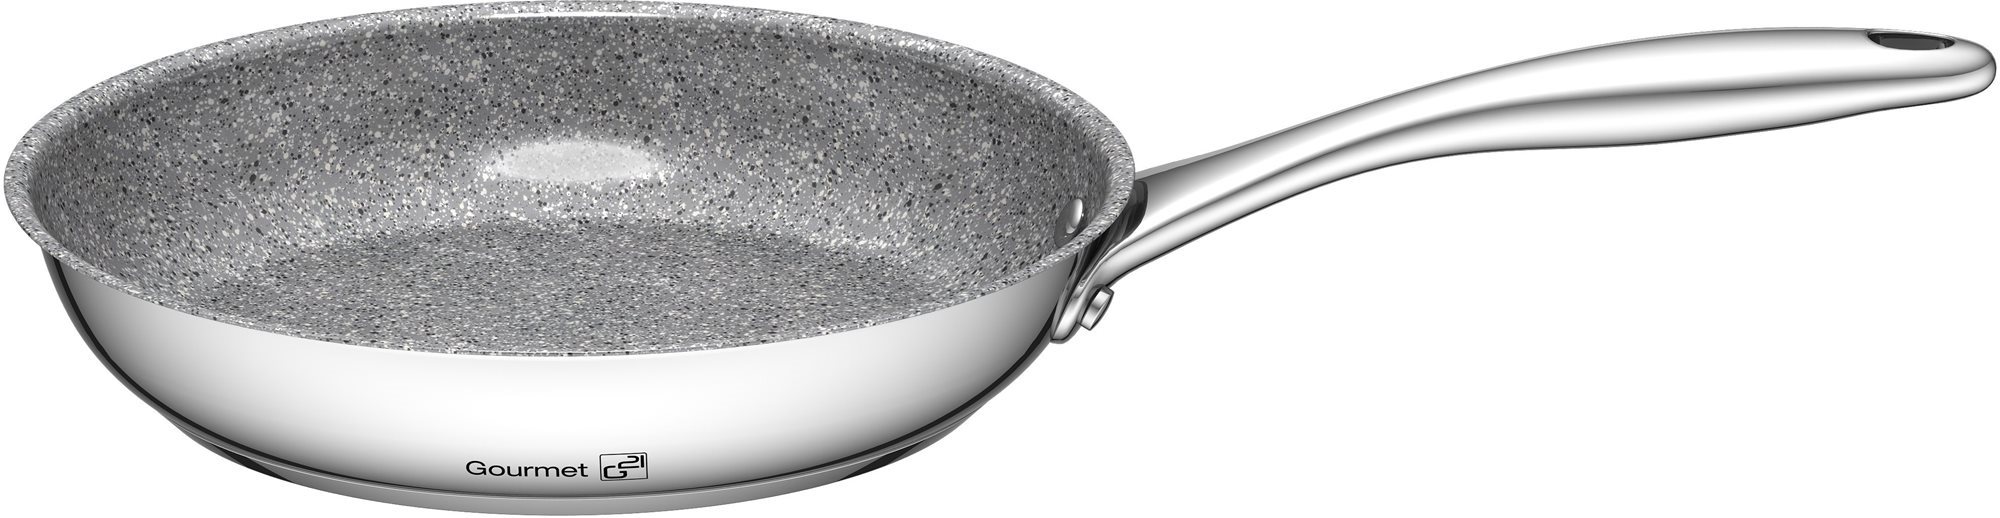 Pan G21 Gourmet Miracle Pot, 28cm with Lid, Stainless steel / Greblon Lateral view